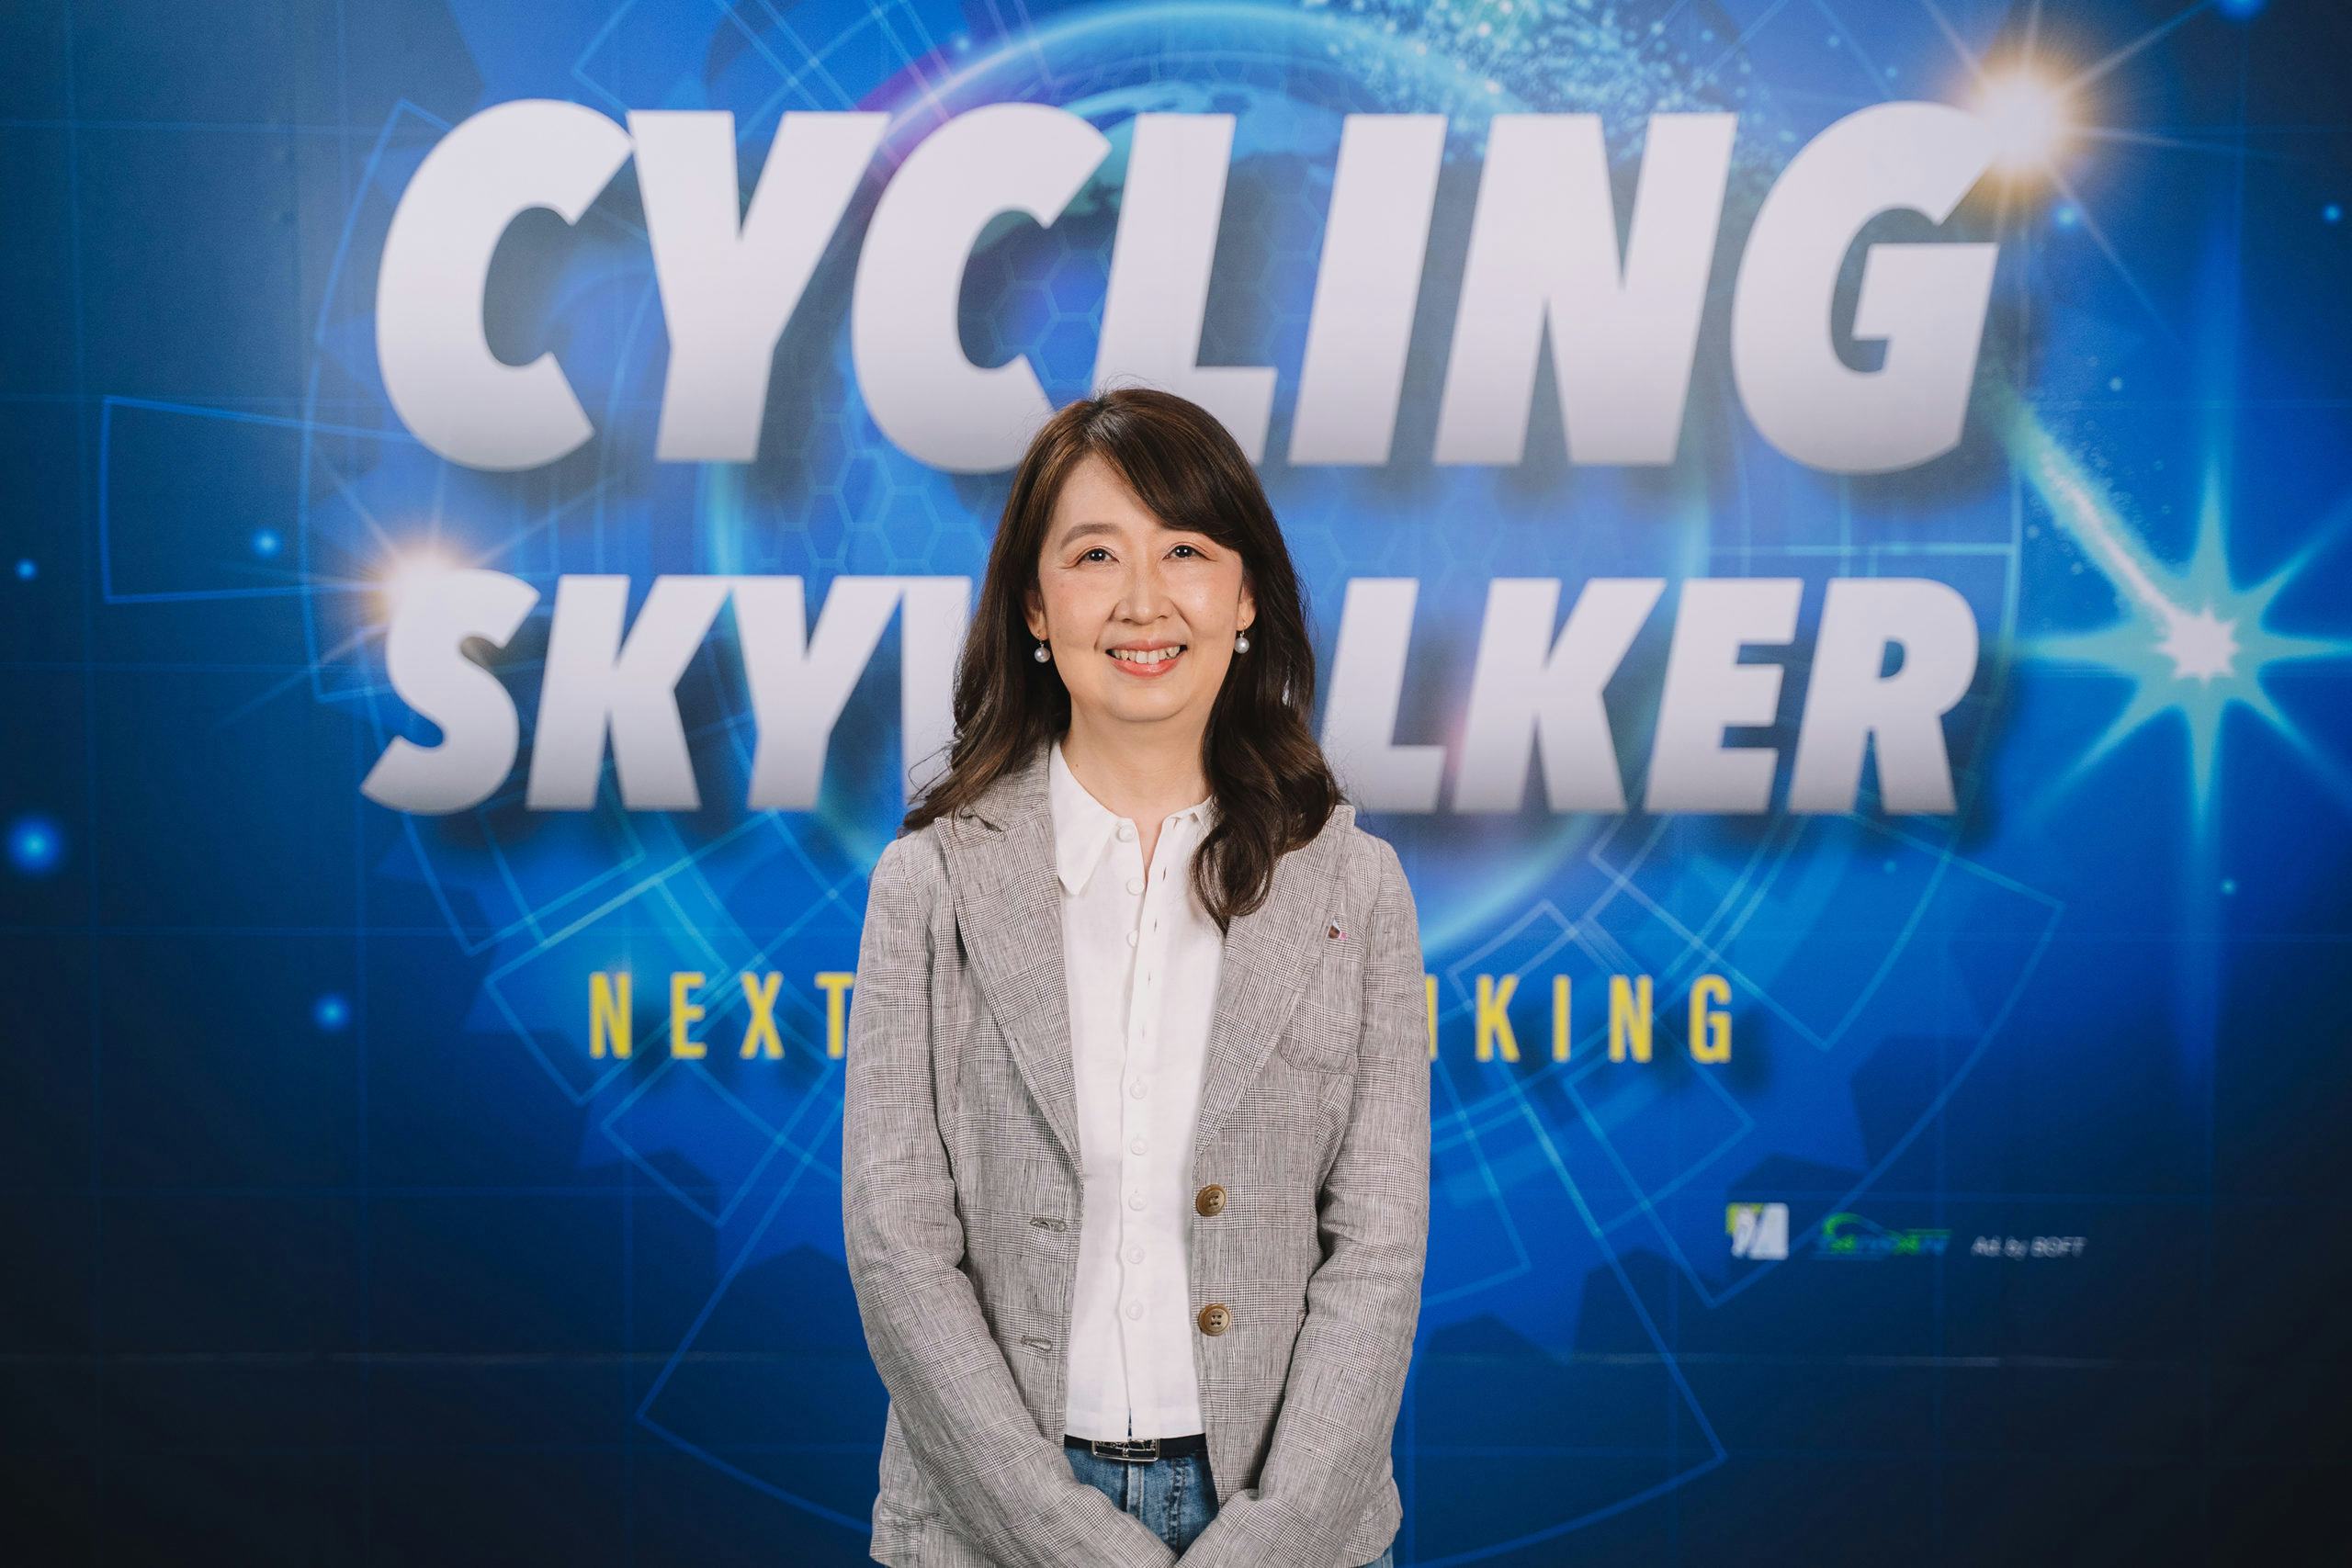 “The demand for big trade and consumer shows will not come back to pre-Covid-19 levels,” says Taiwan Bicycle Association (TBA) Secretary General Gina Chang.